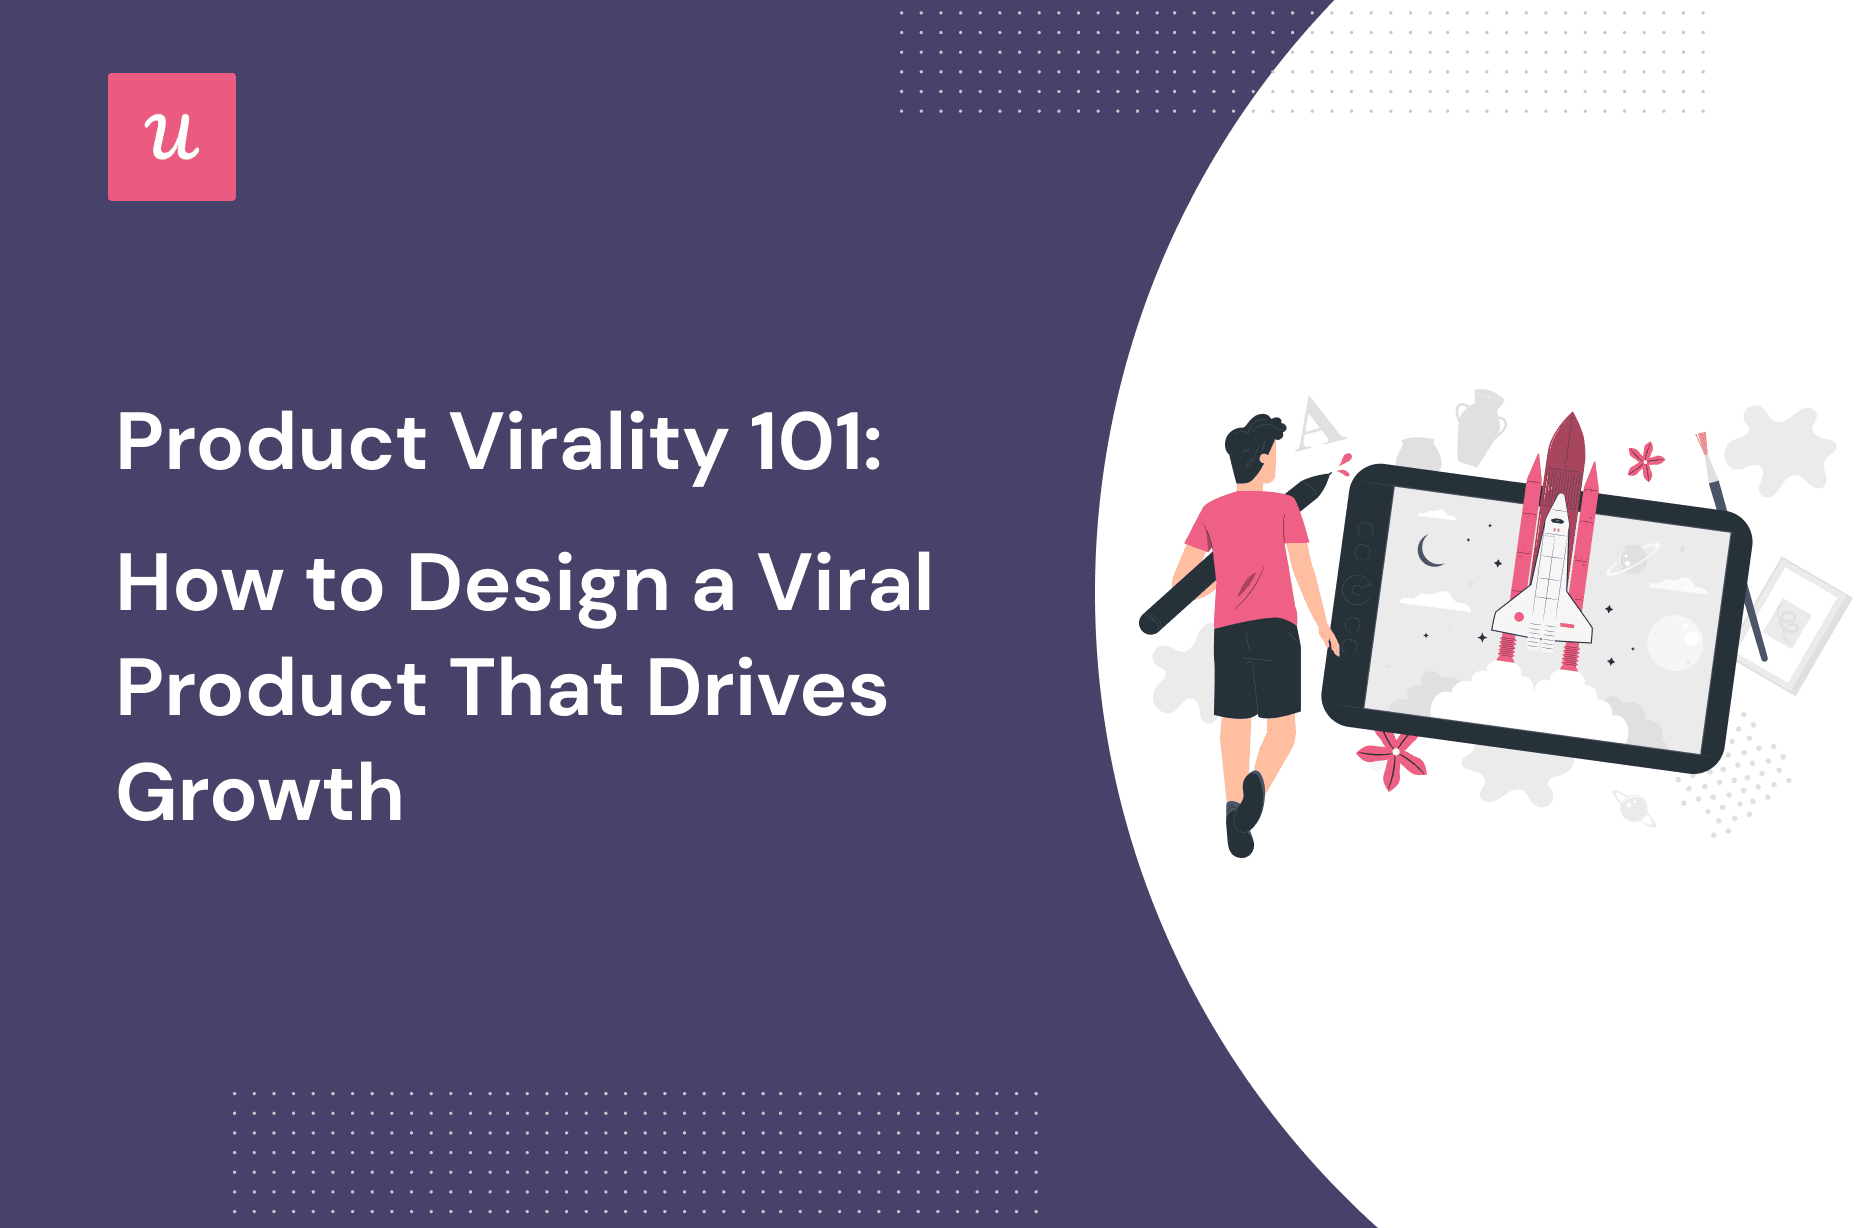 Product Virality 101: How To Design a Viral Product That Drives Growth cover